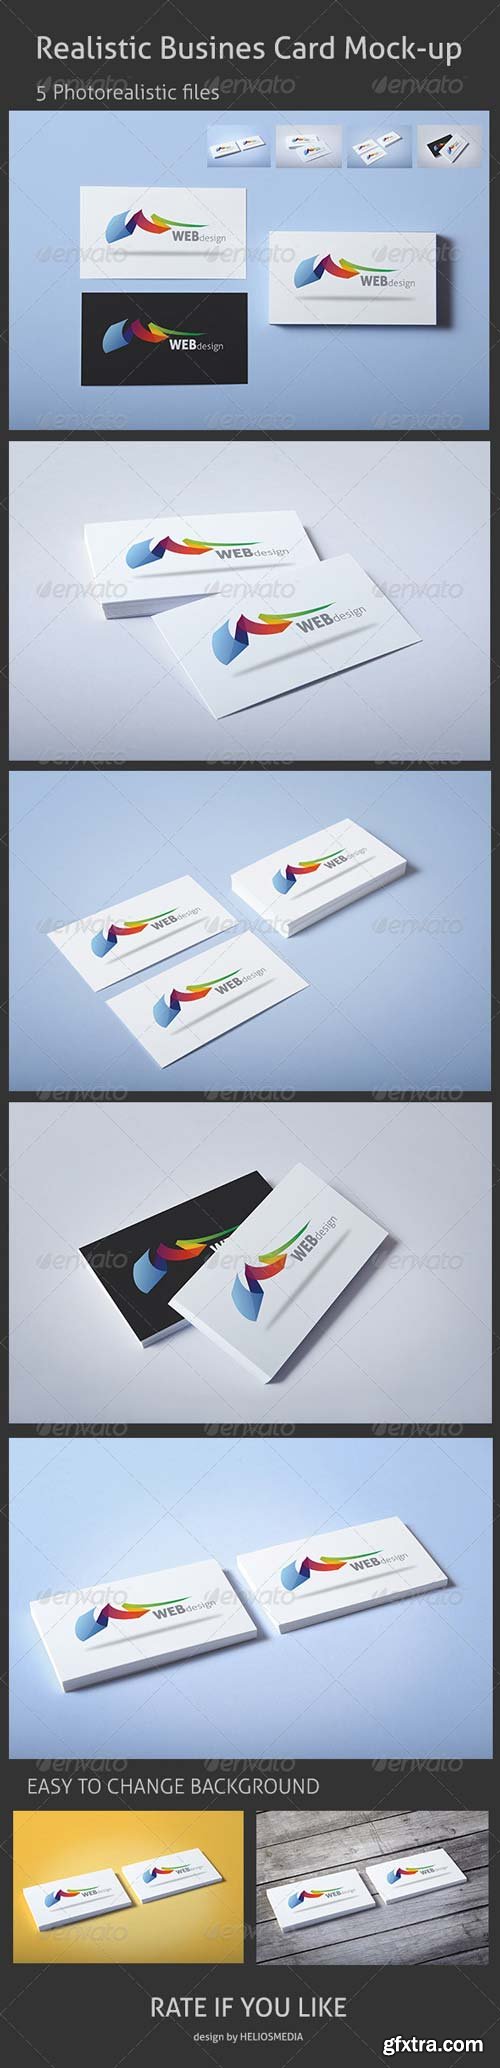 GraphicRiver - Realistic Business Card Mock-up - 3441462